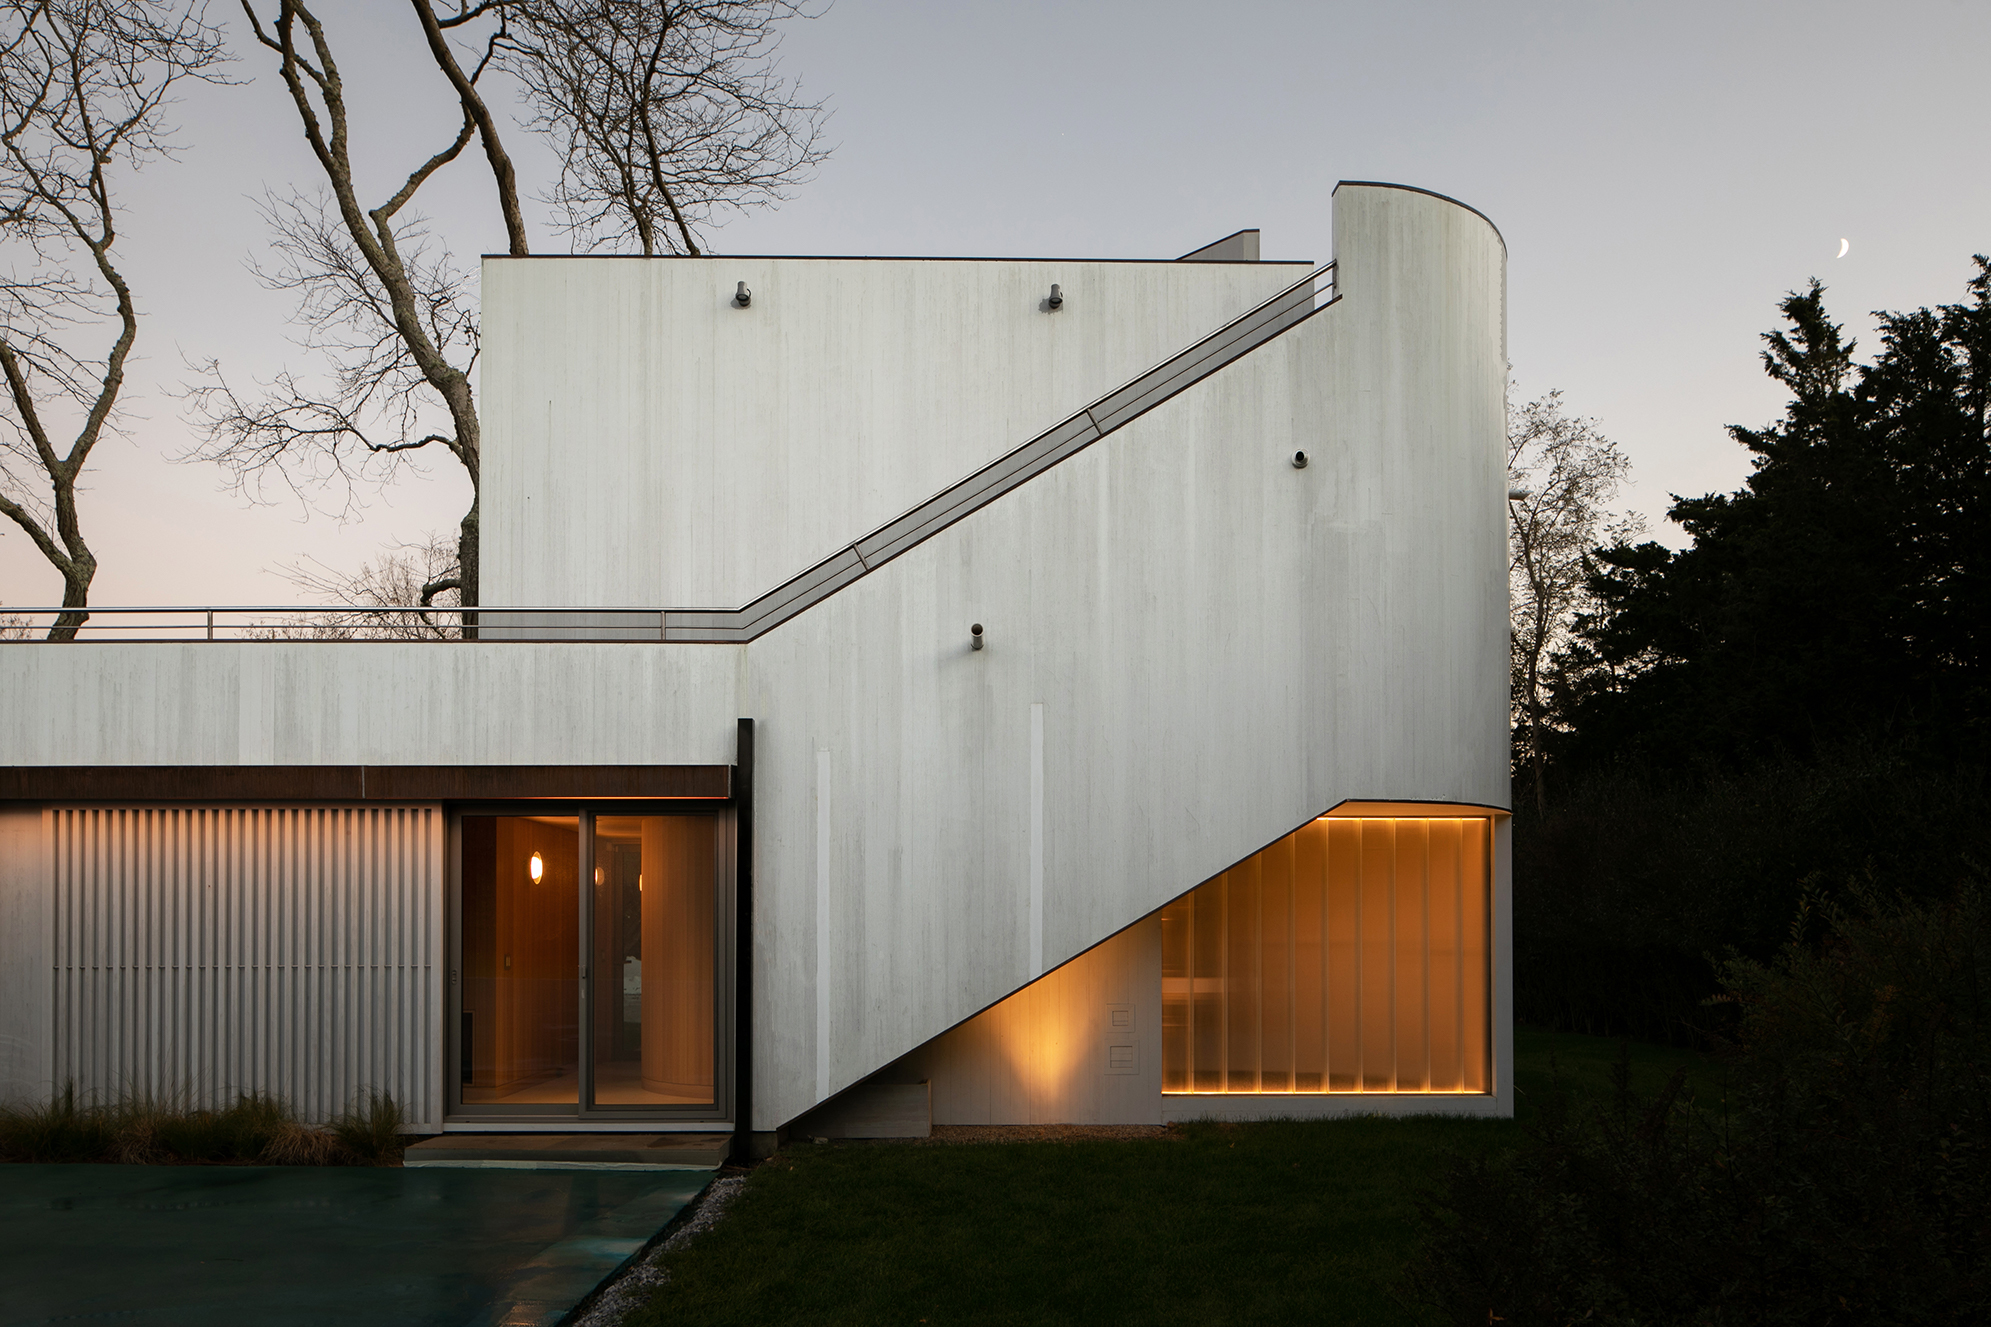 Tolan House, originally designed in 1970 by Charles Gwathmey and renovated by Martin Architects, earning an Honor Award for Historic Preservation/Adaptive Reuse.  CONOR HARRIGAN